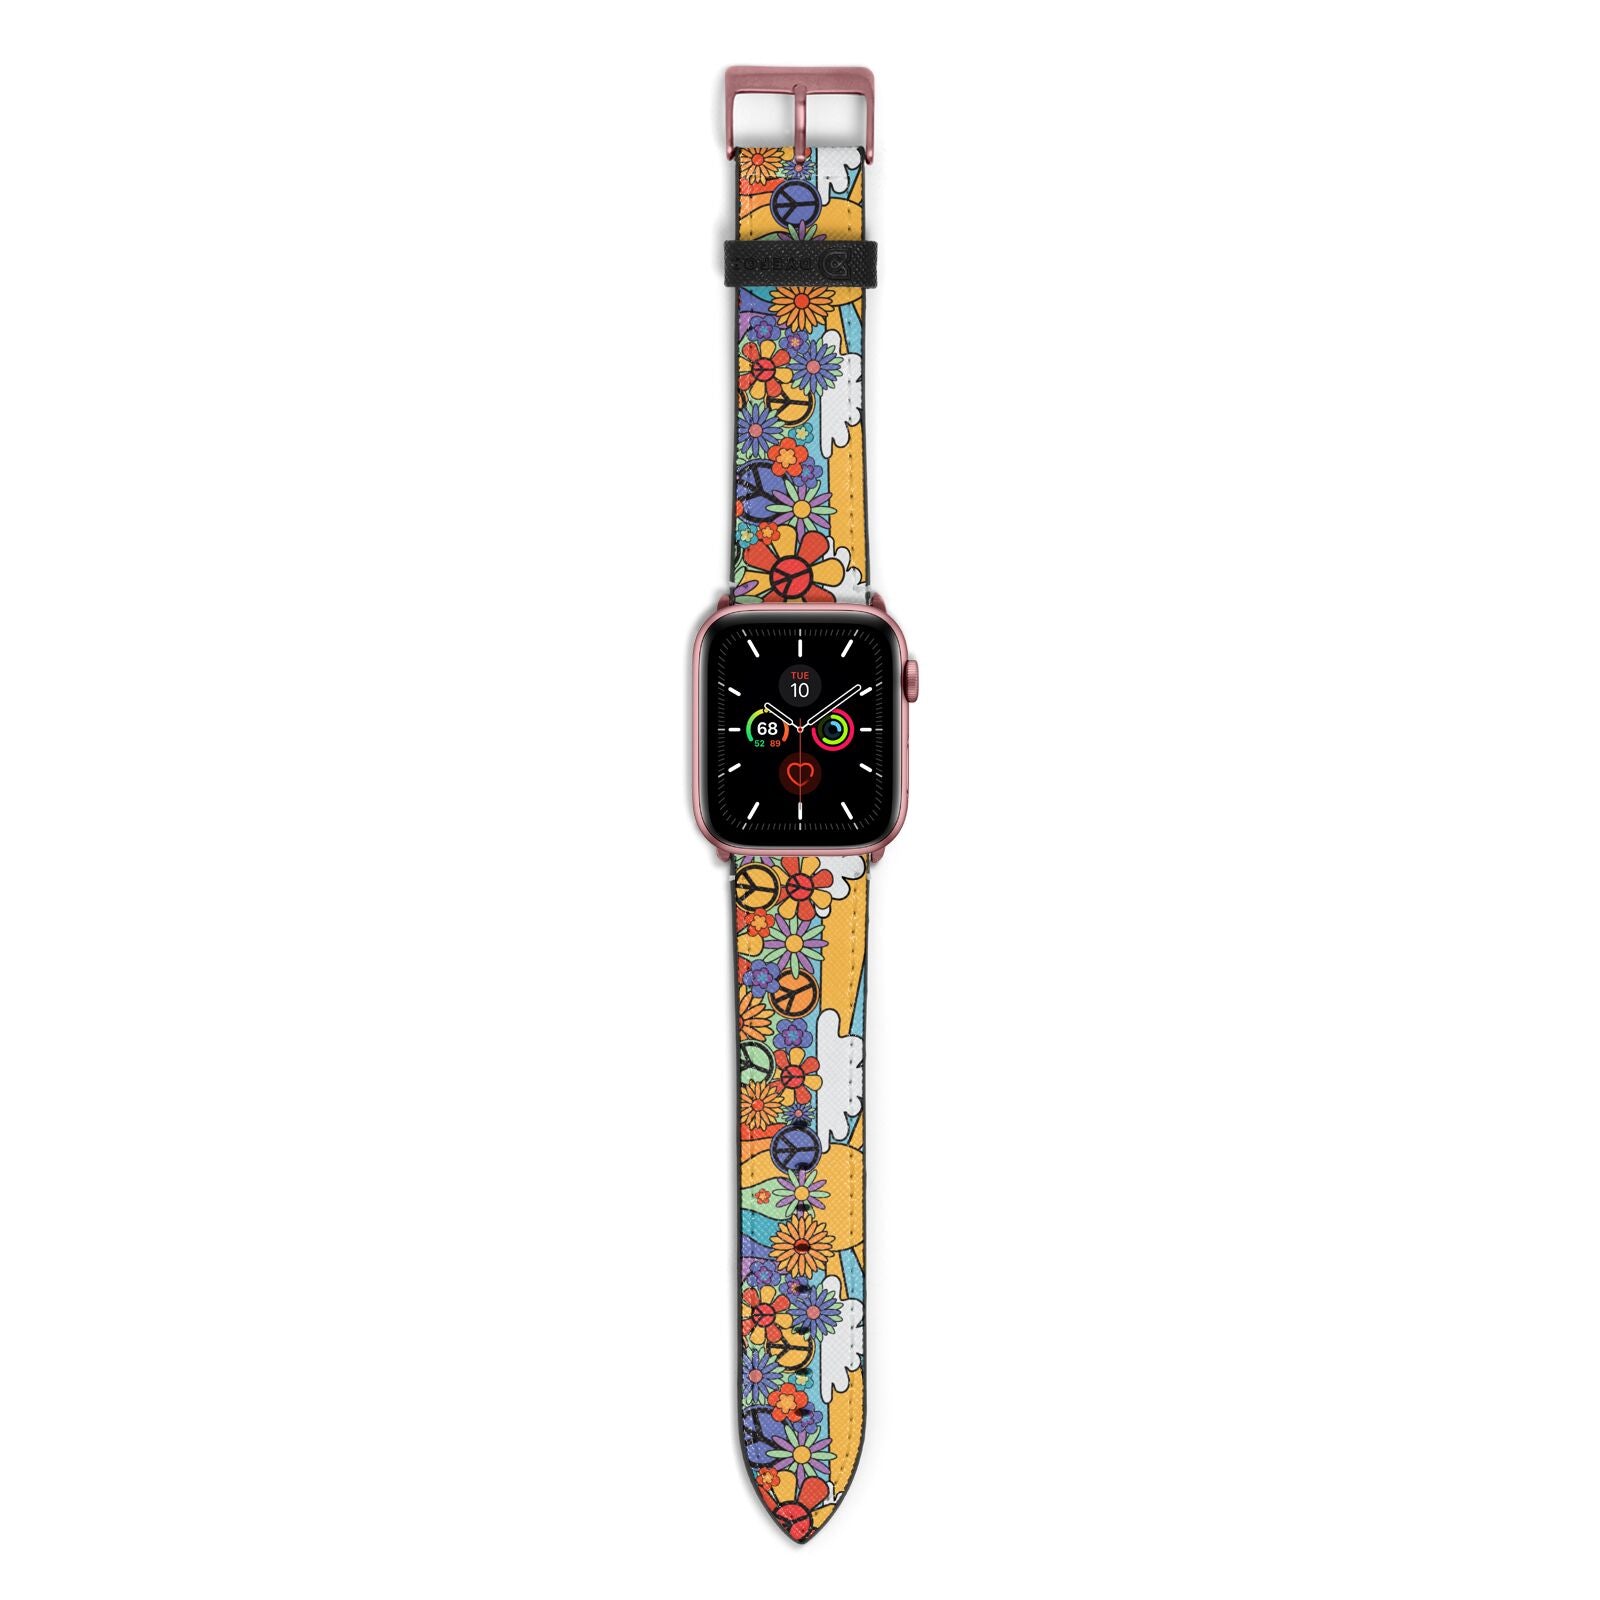 Seventies Groovy Retro Apple Watch Strap with Rose Gold Hardware